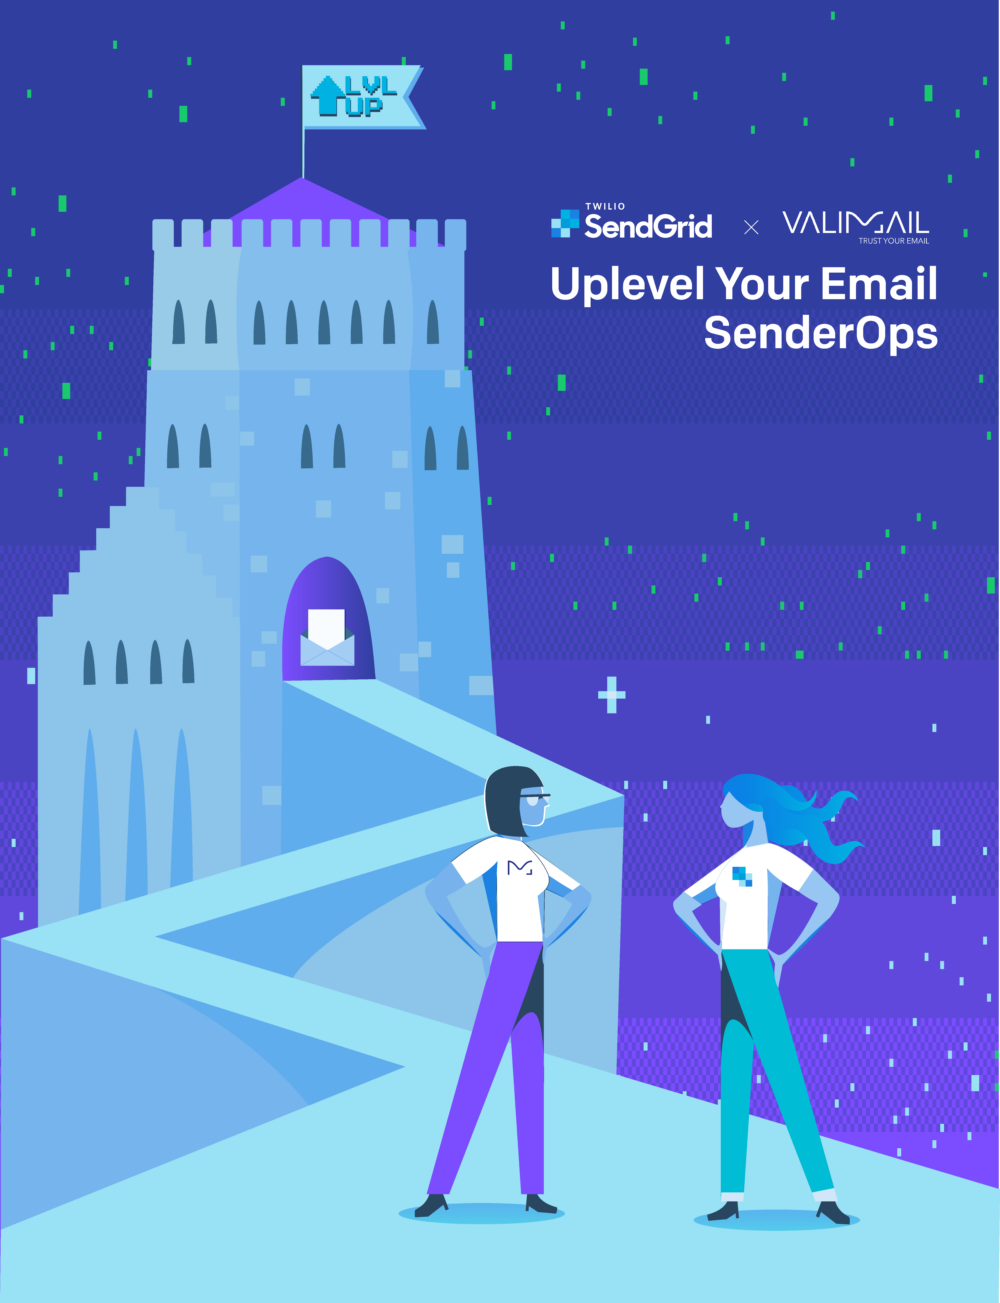 Guide to uplevel your email senderops